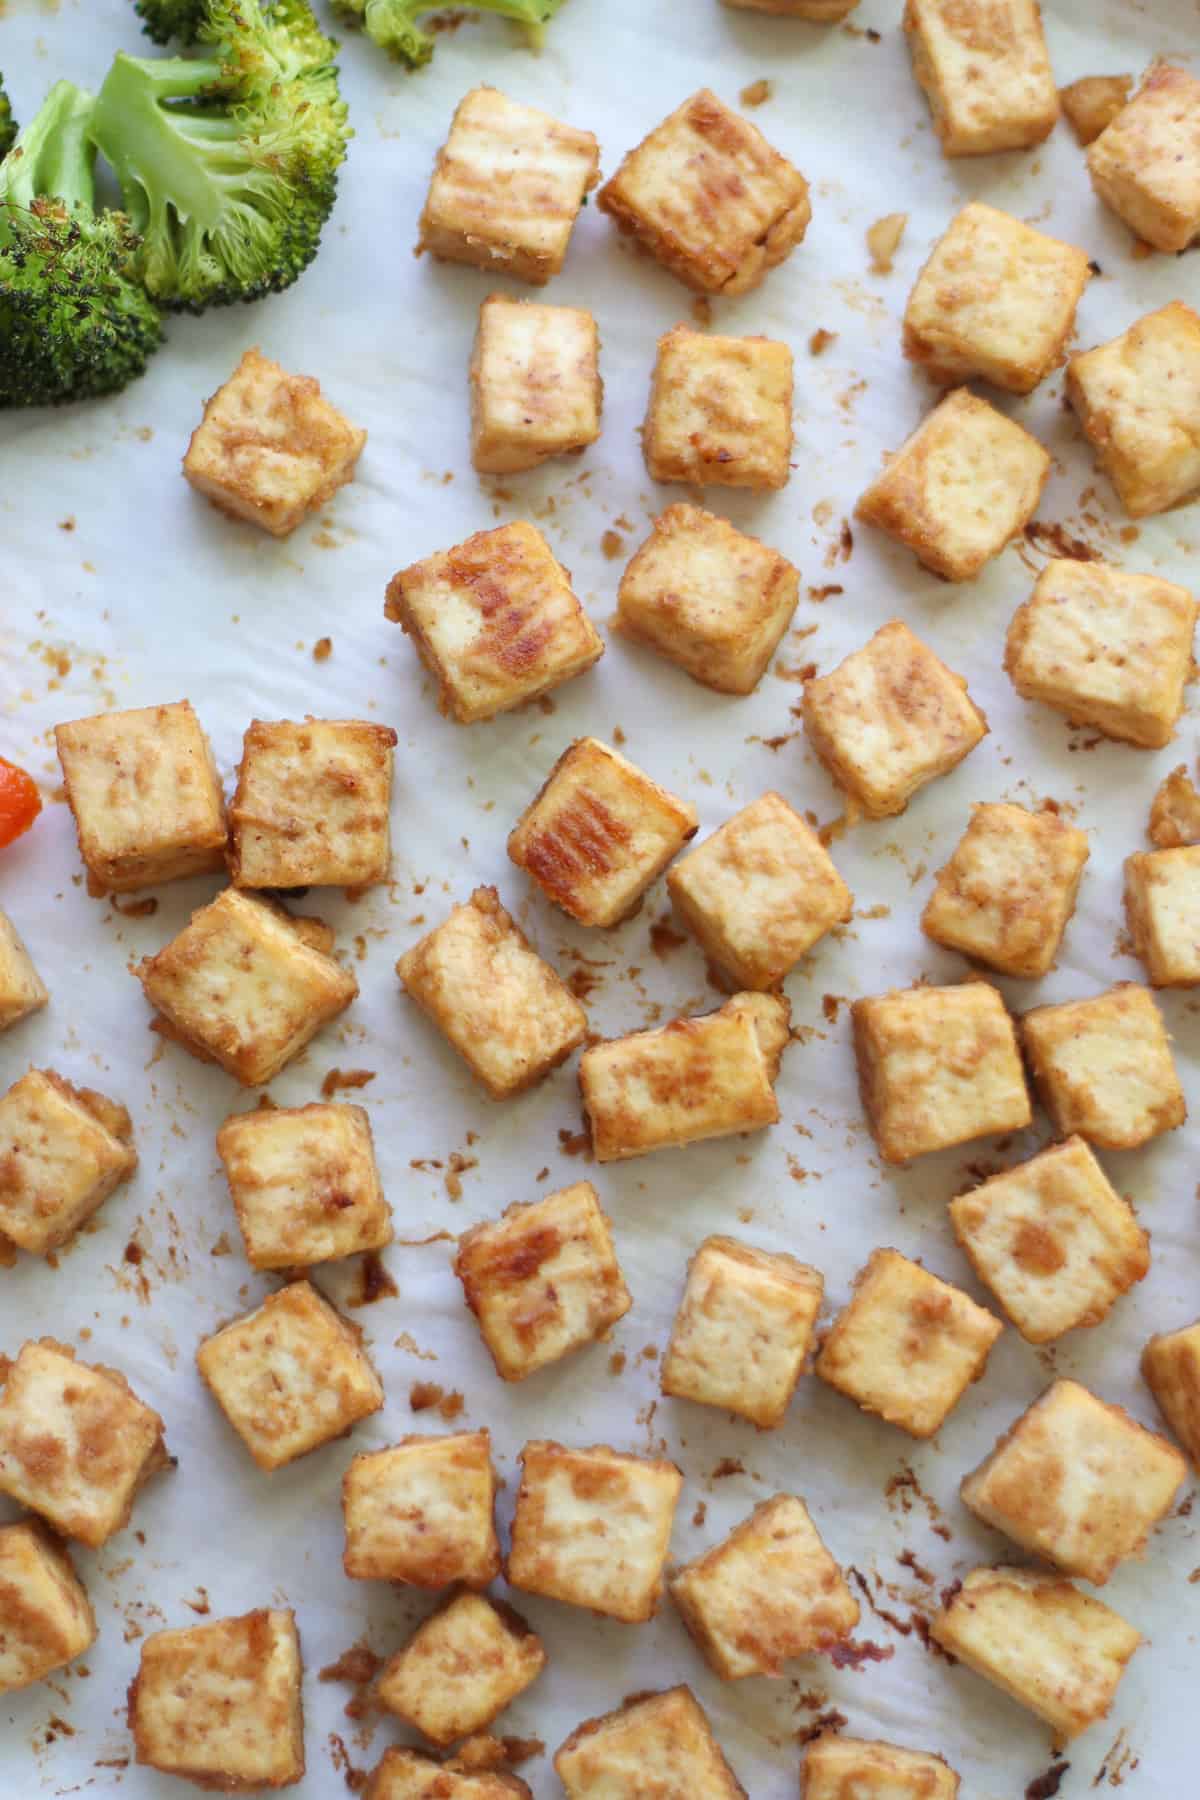 Freshly baked tofu on a parchment lined baking sheet.